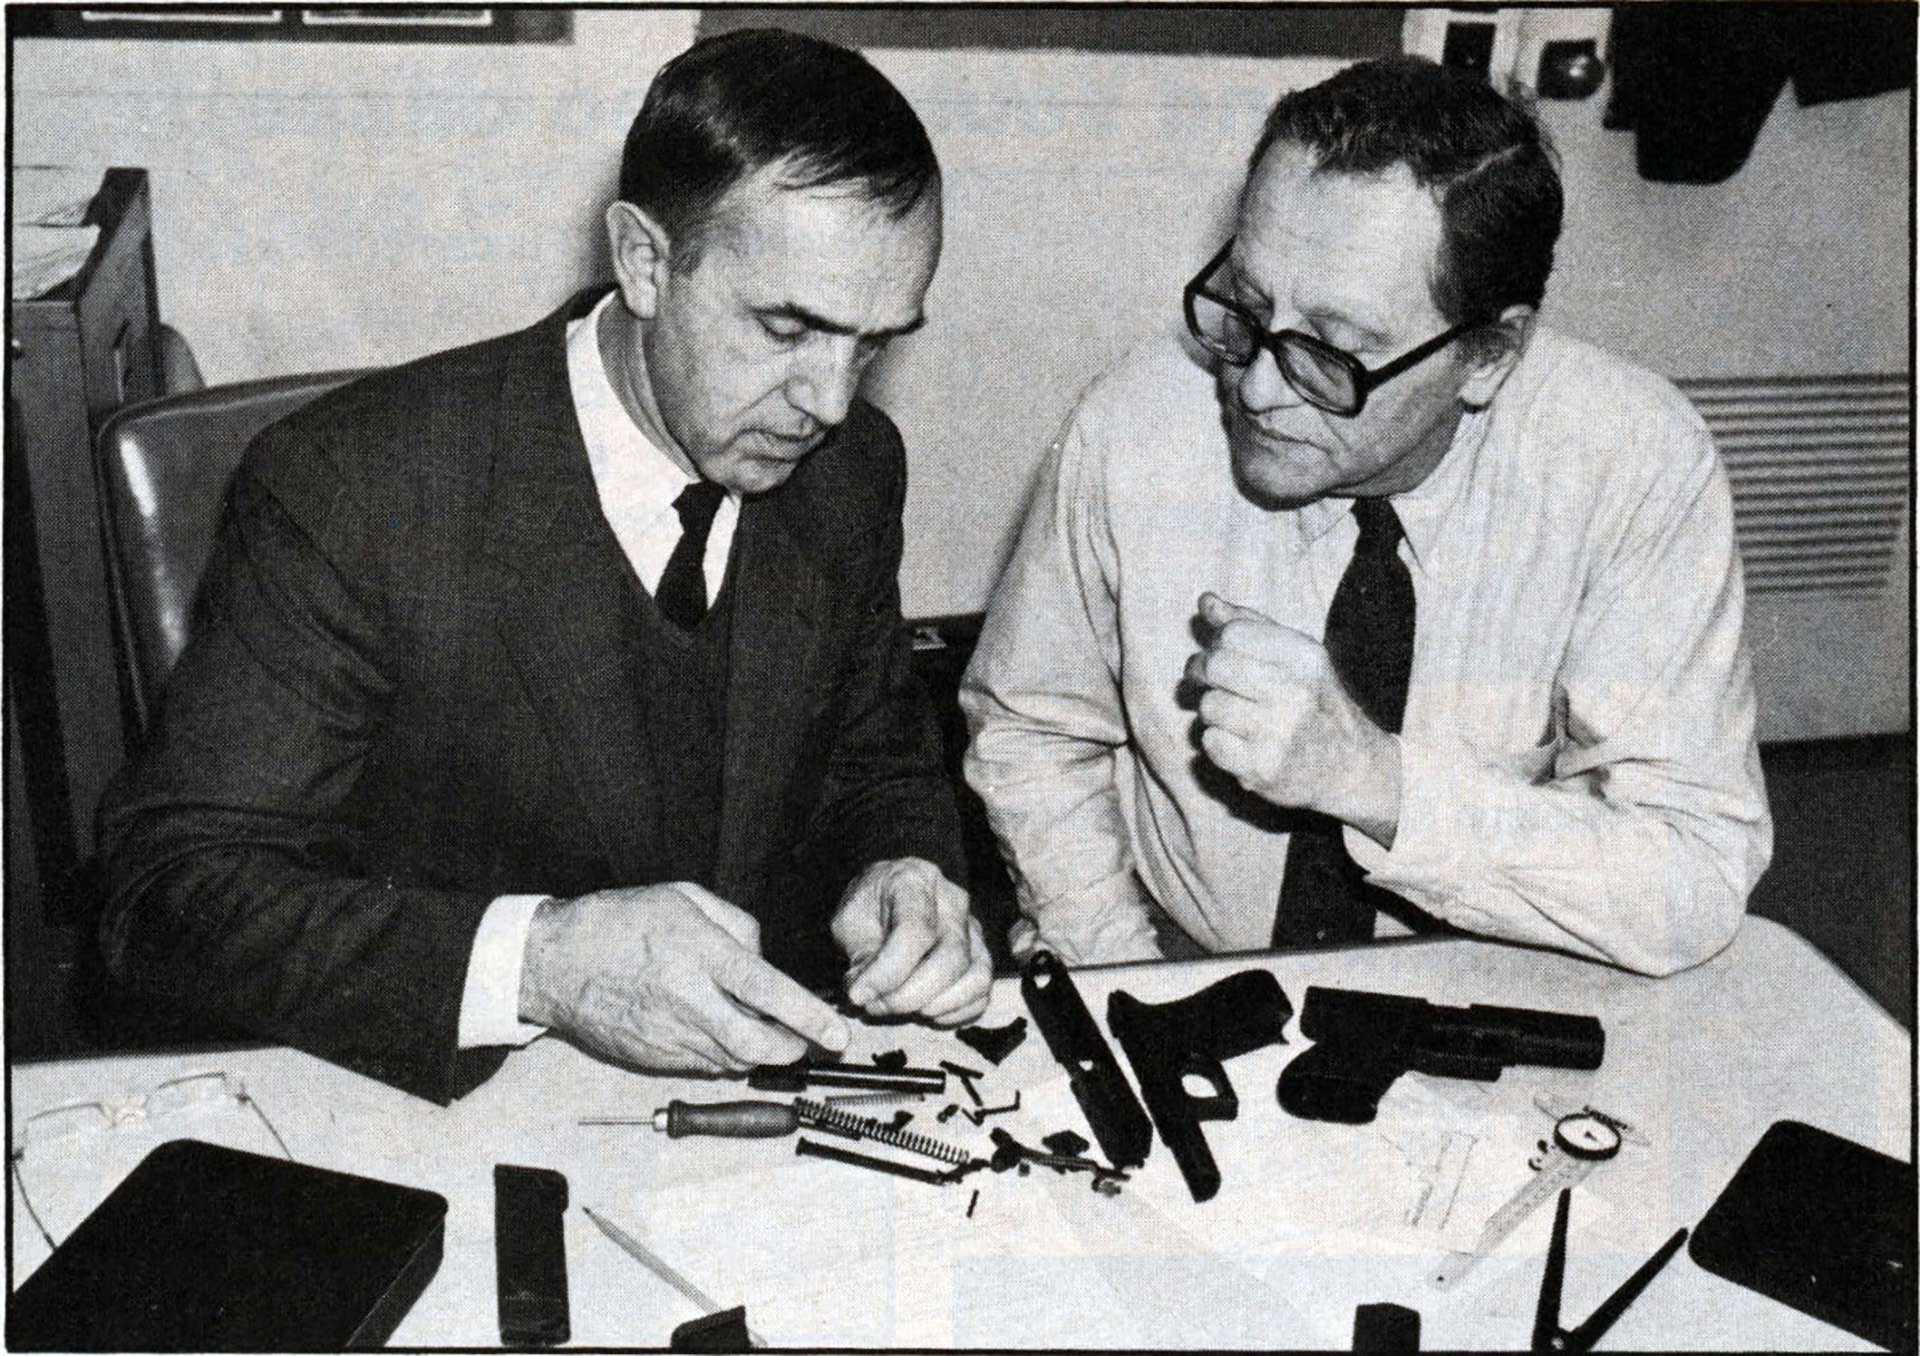 Two men sitting at a table, disassembling a Glock 17 pistol.